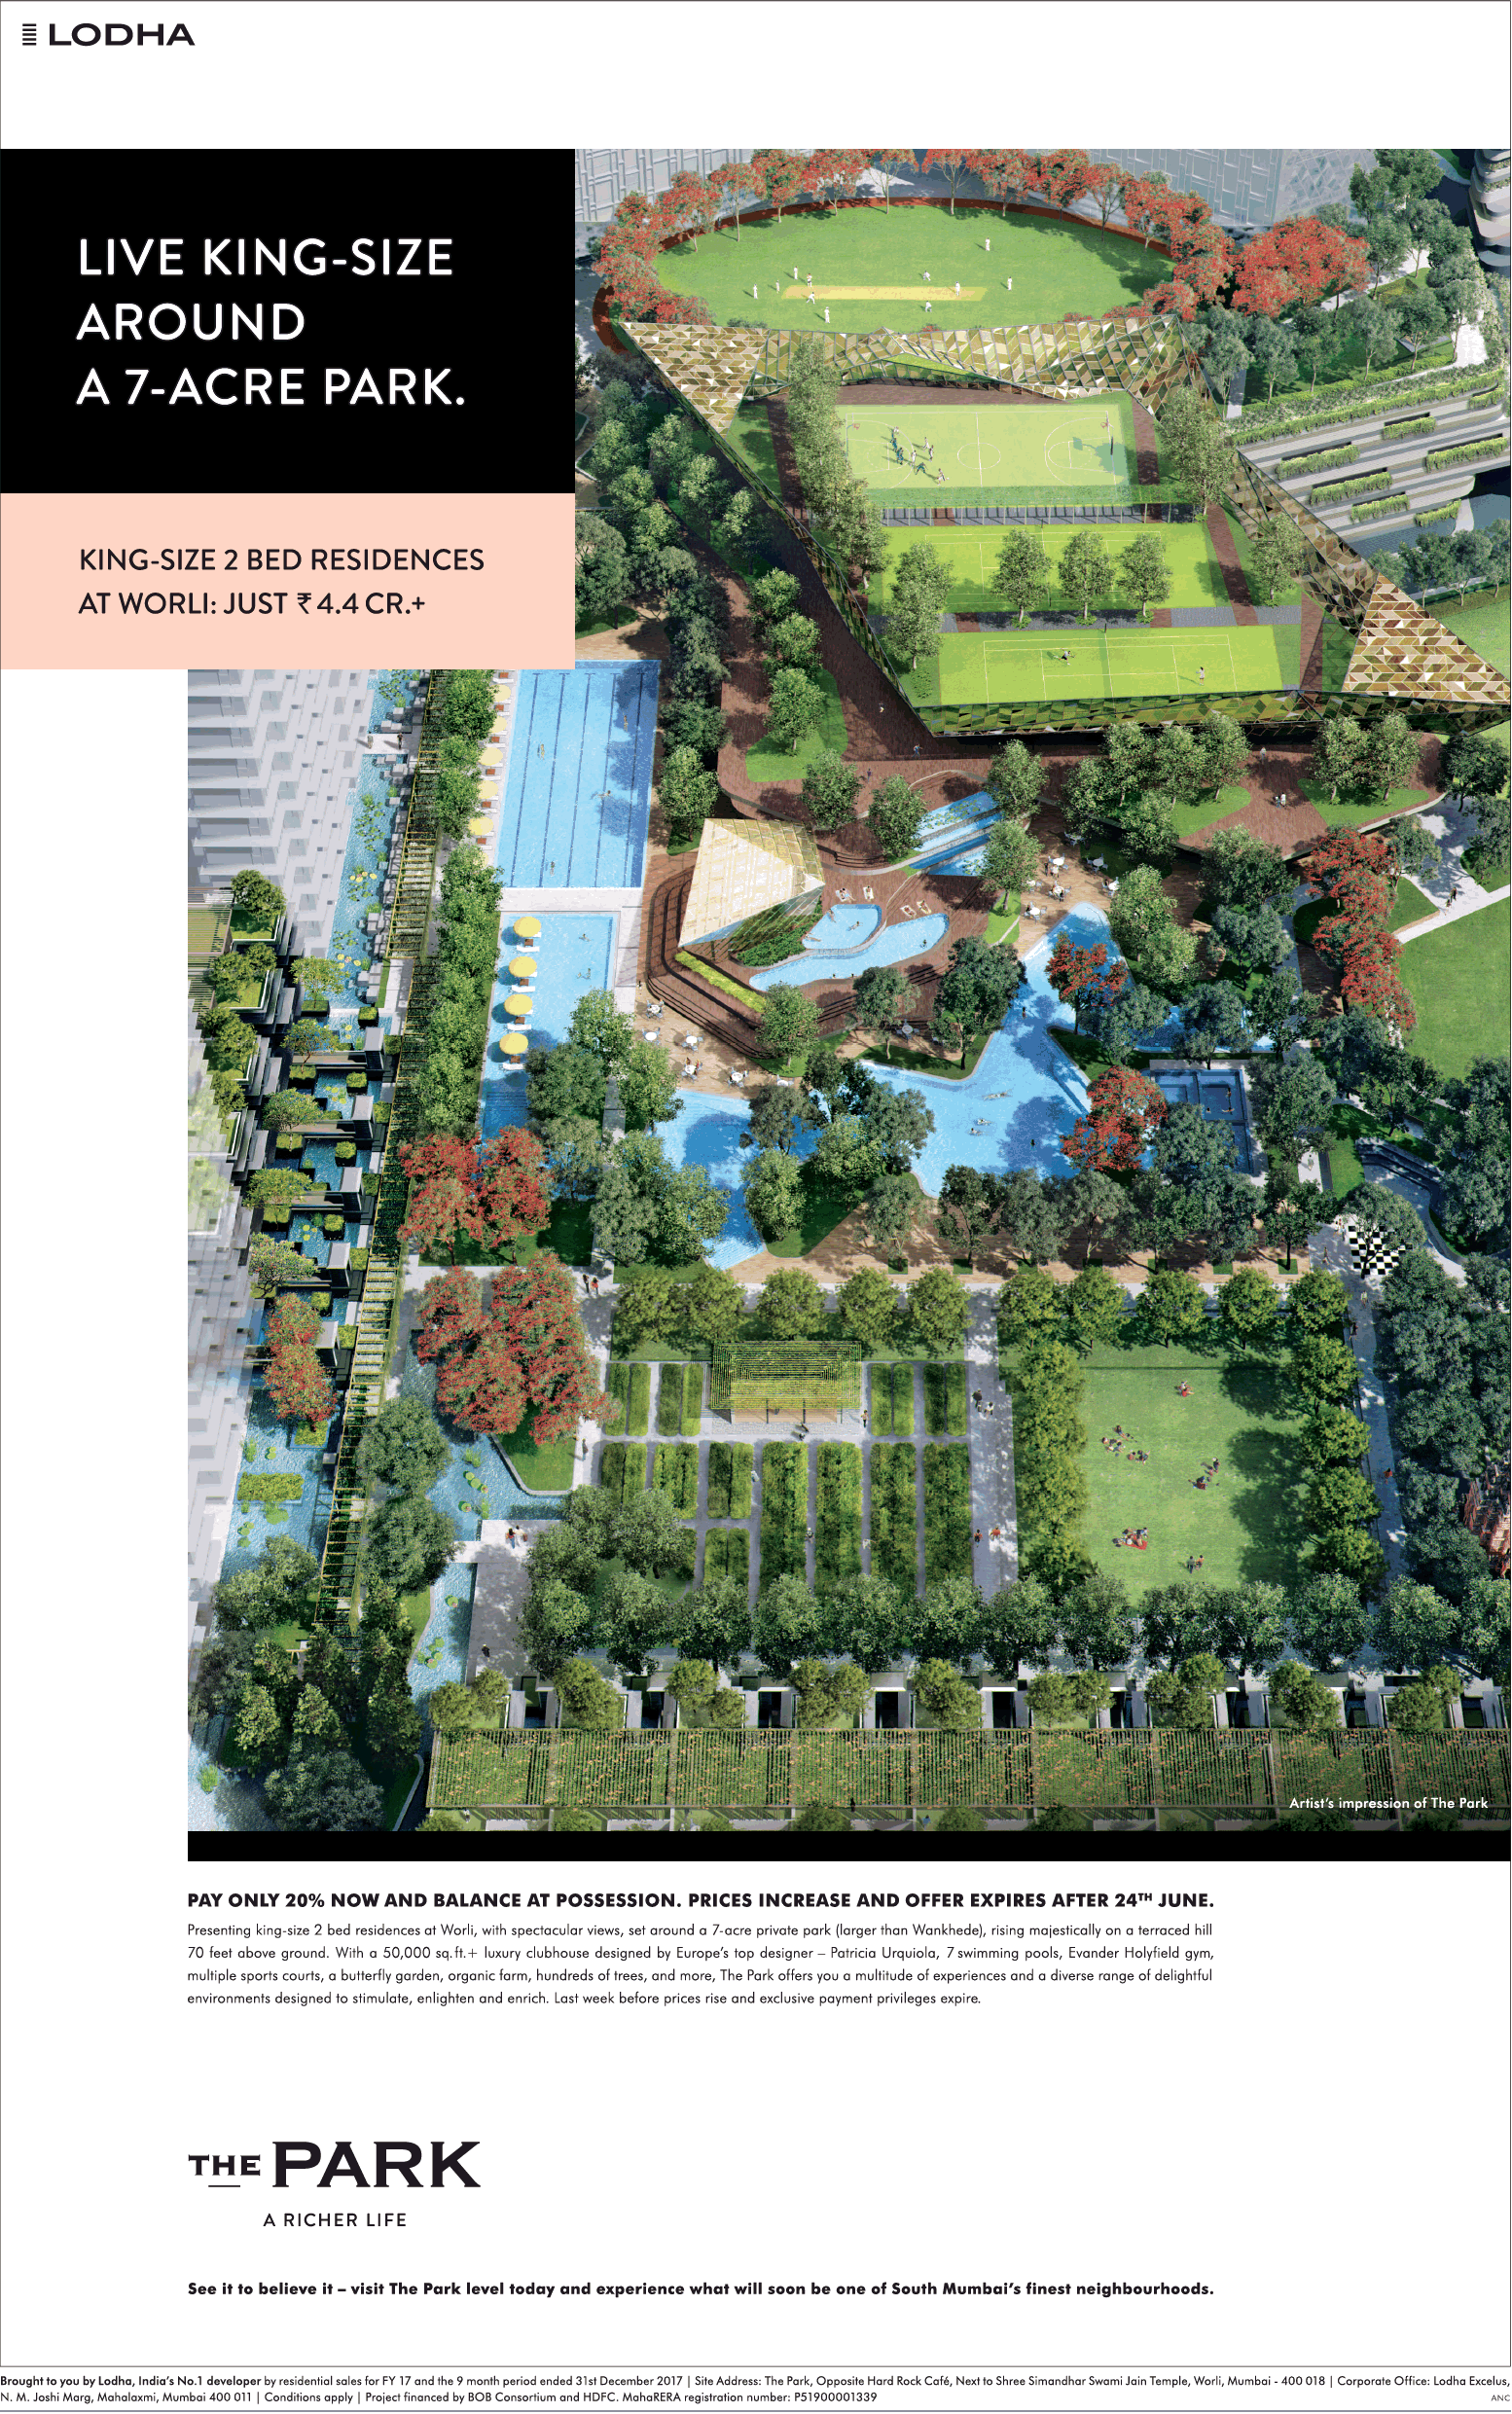 Pay only 20% now & balance at possession at Lodha The Park in Mumbai Update